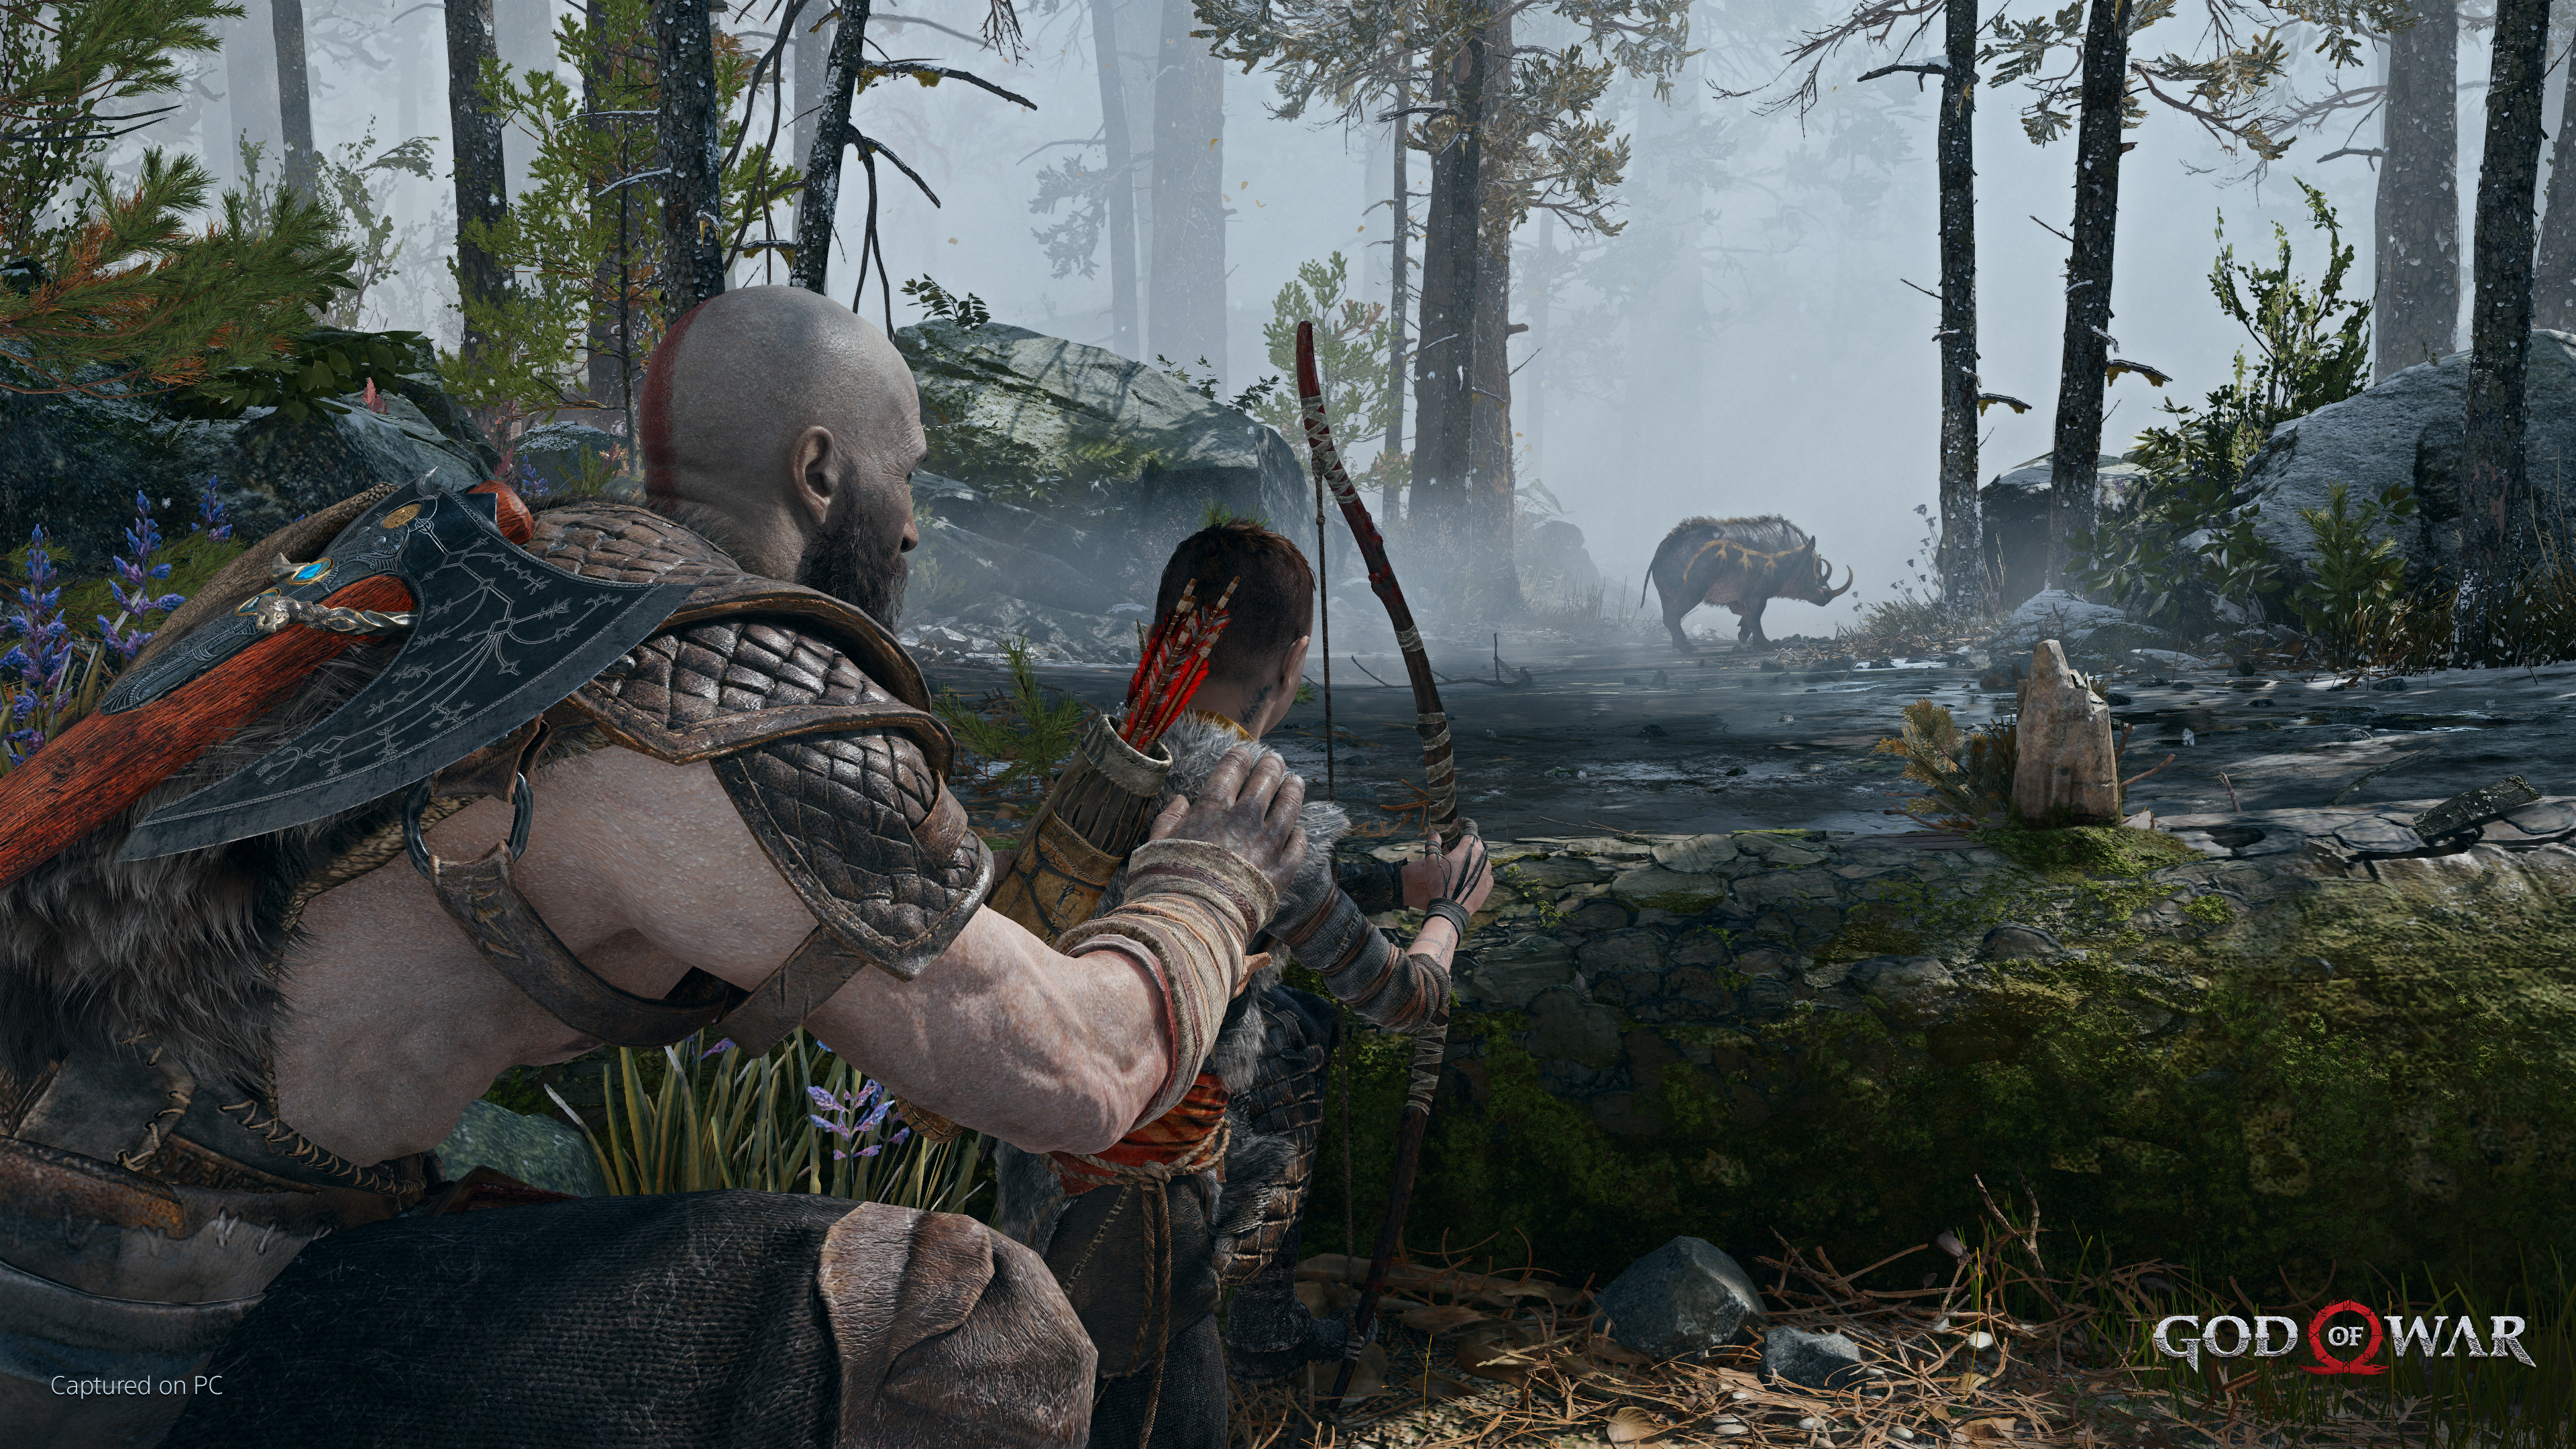 God of War PC Version Spotted in GeForce Now Database, Suggesting